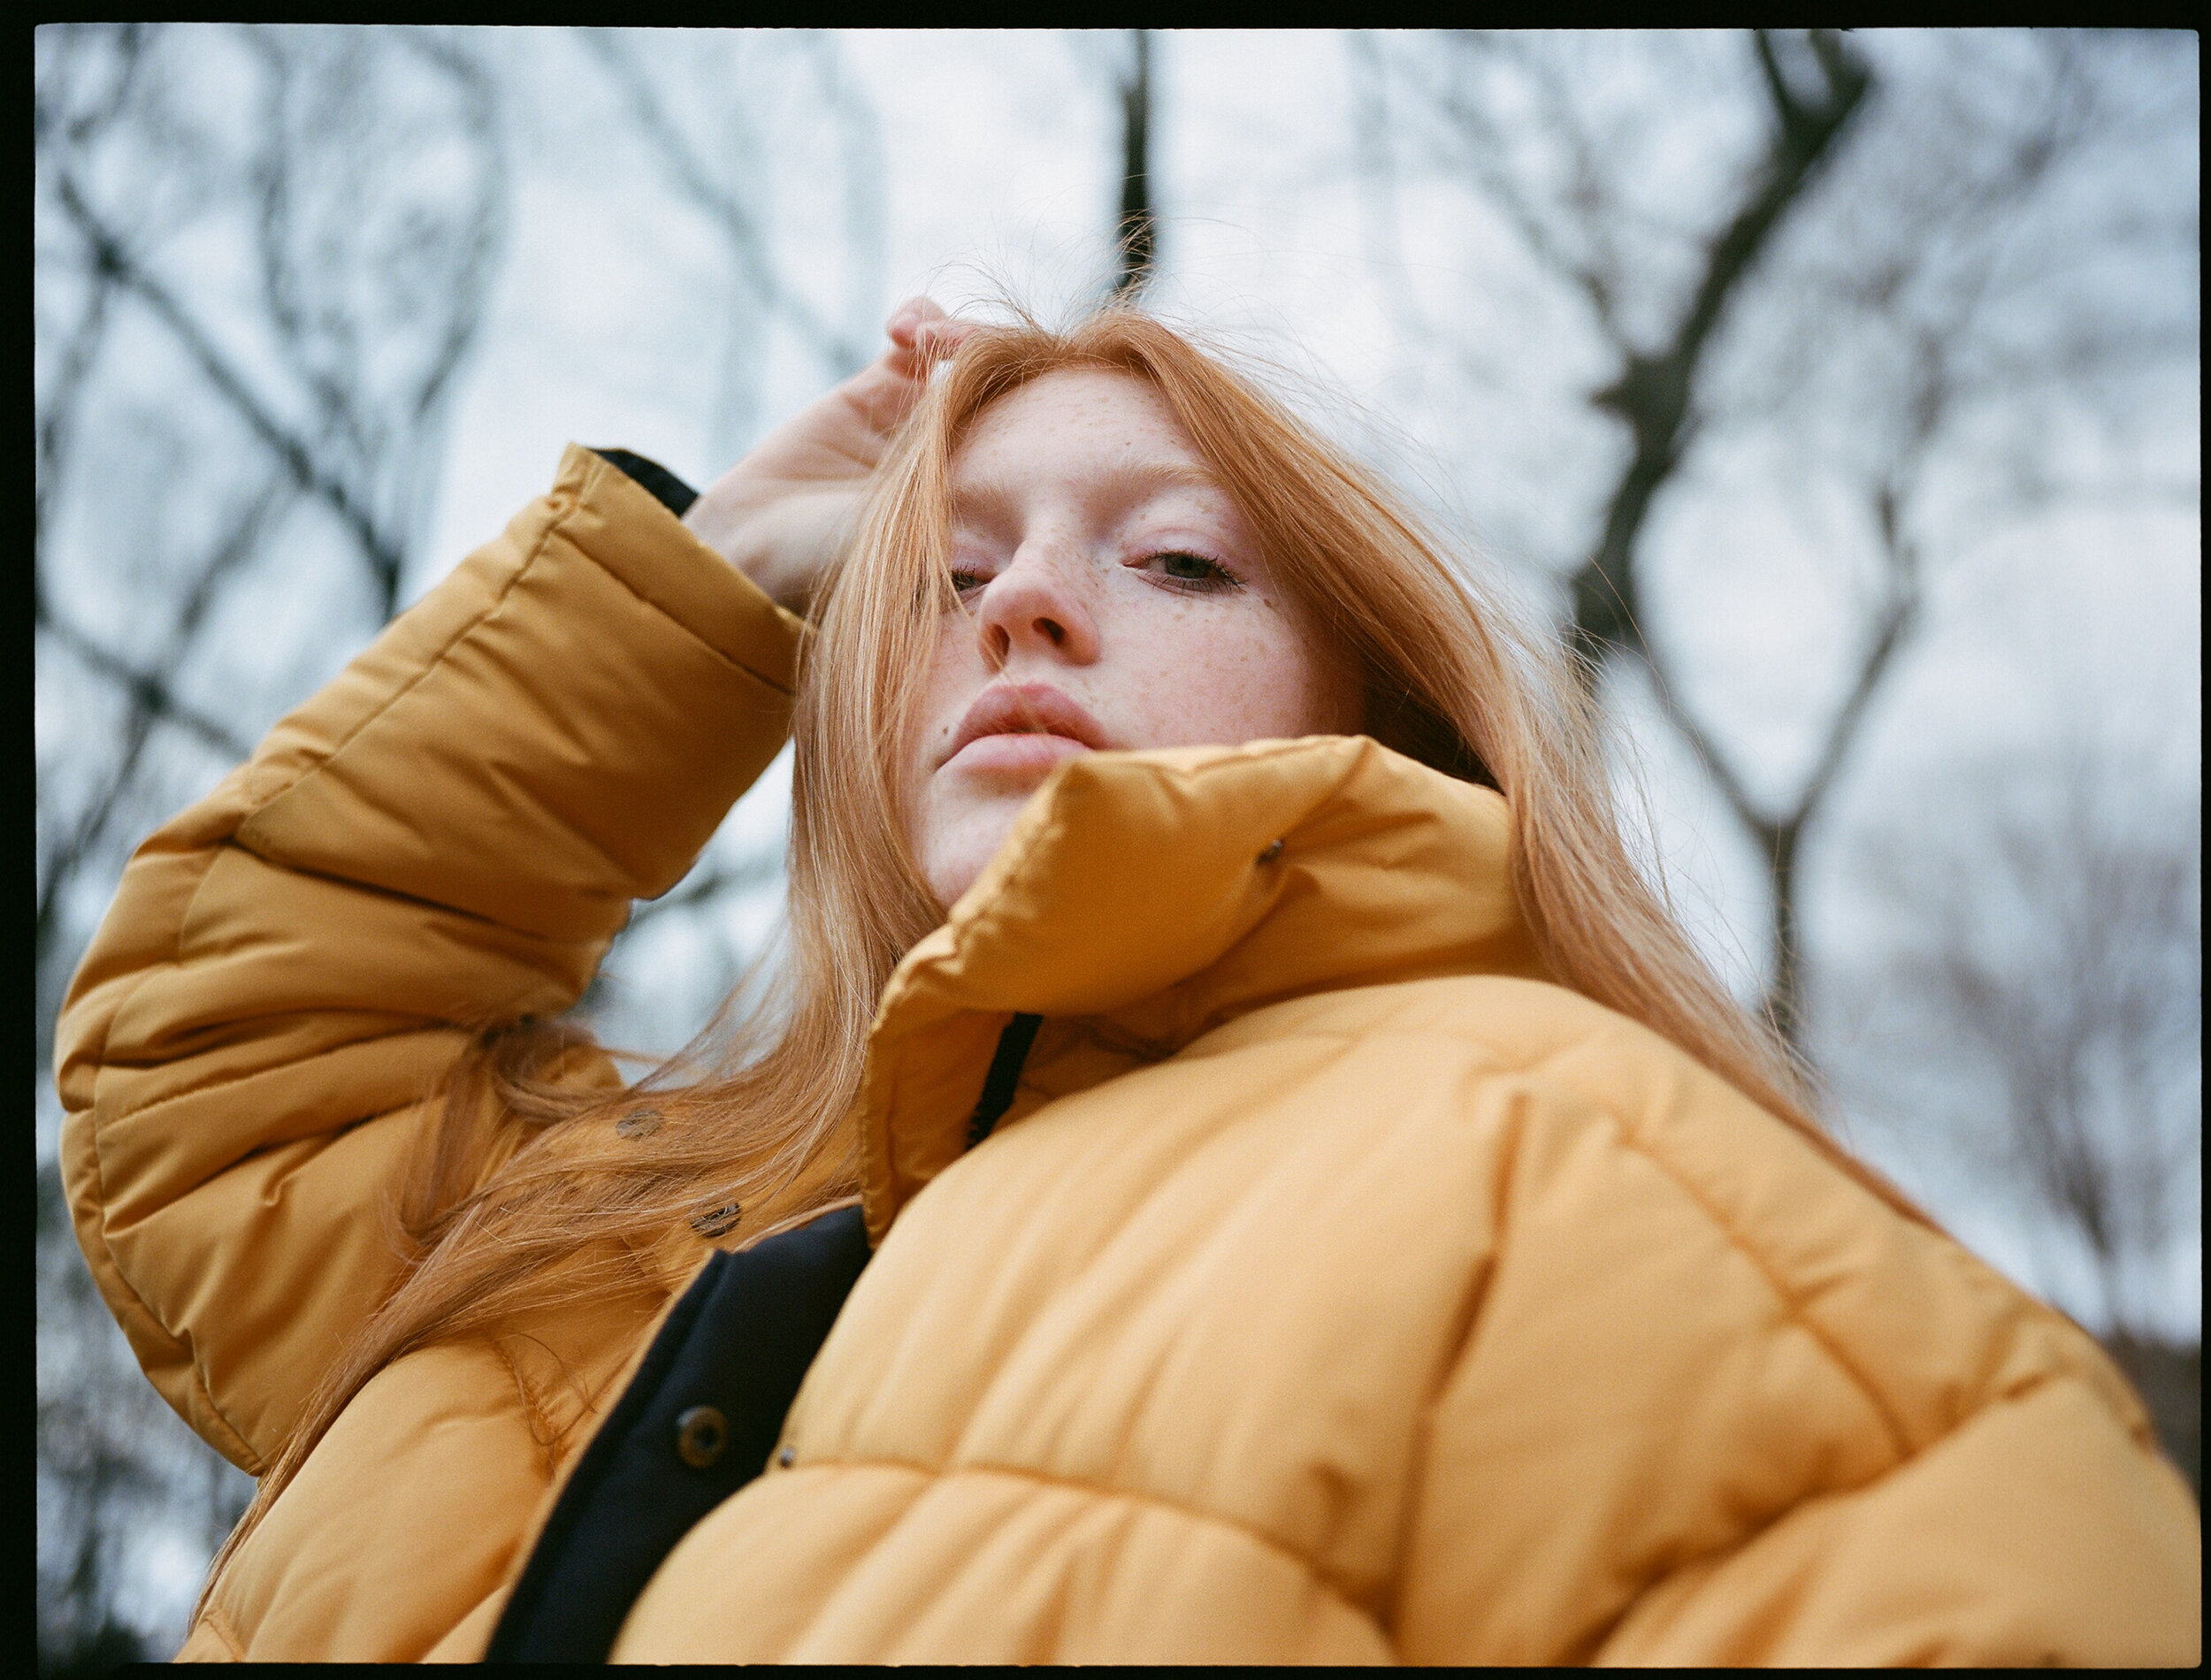 Redhead model Lili Ruger wearing a yellow puffy jacket in Central Park